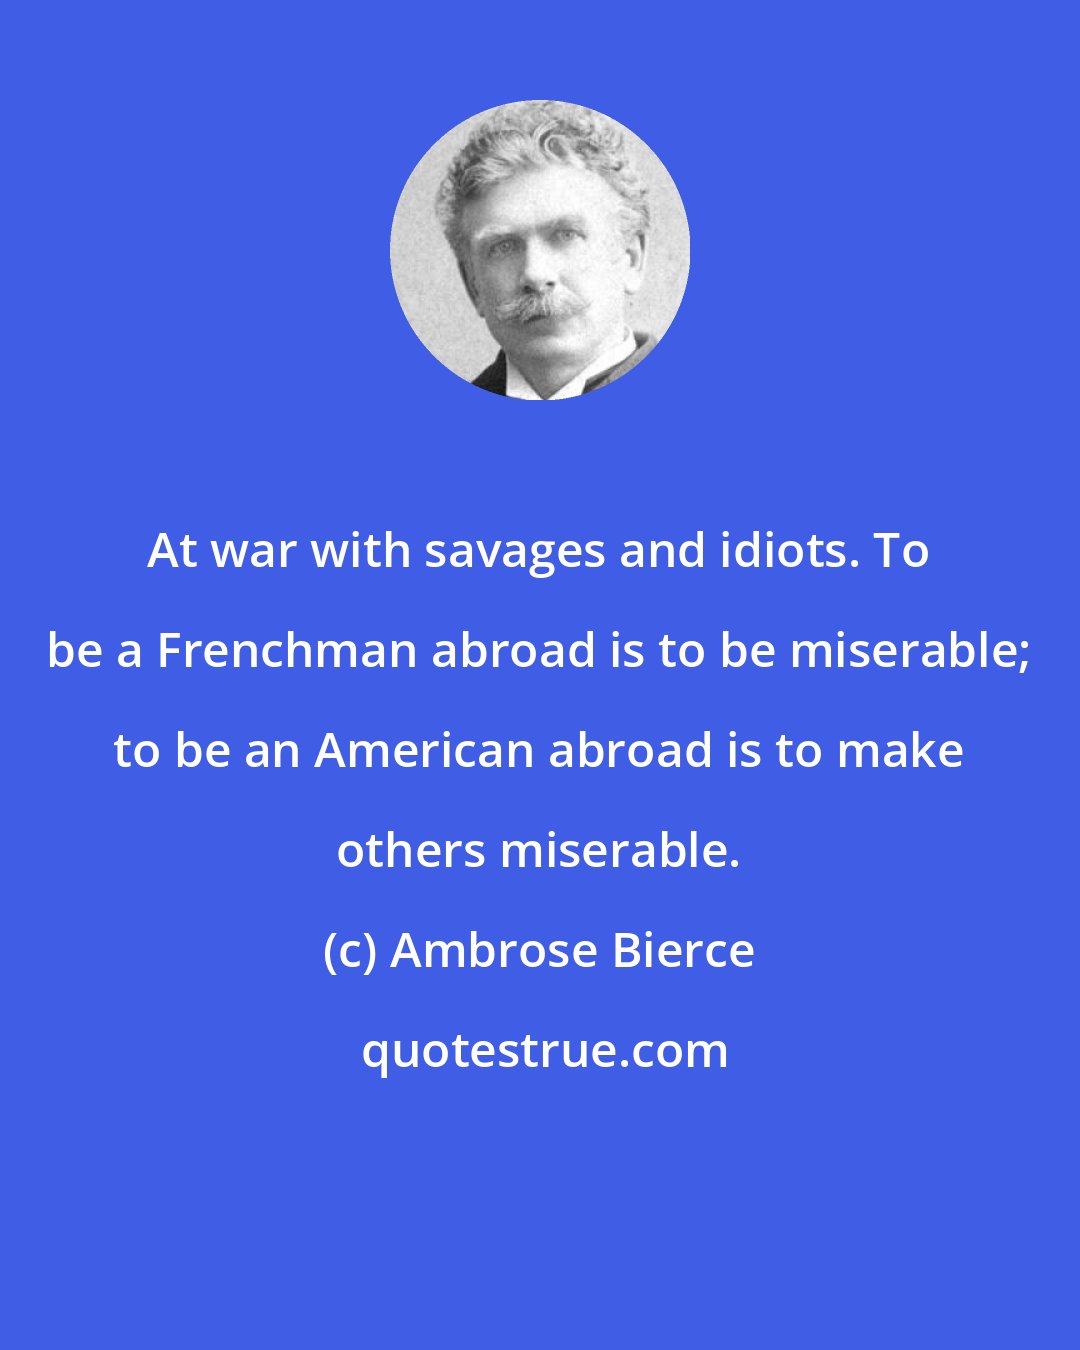 Ambrose Bierce: At war with savages and idiots. To be a Frenchman abroad is to be miserable; to be an American abroad is to make others miserable.